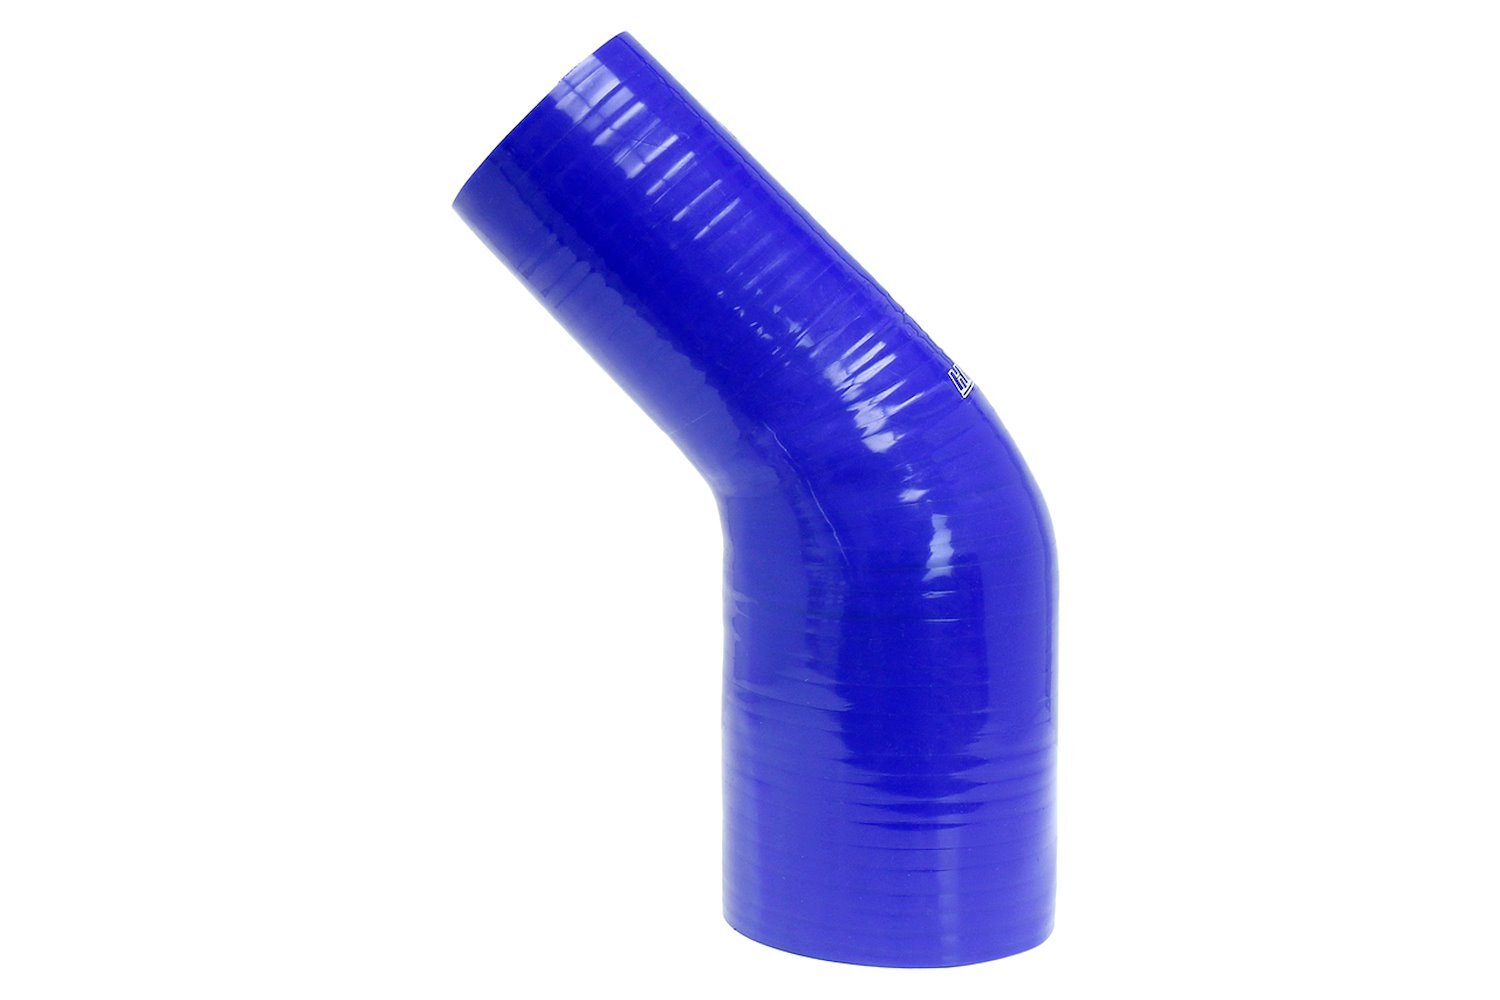 HTSER45-300-325-BLUE Silicone 45-Degree Elbow Hose, High-Temp 4-Ply Reinforced, 3 in. - 3-1/4 in. ID, Blue